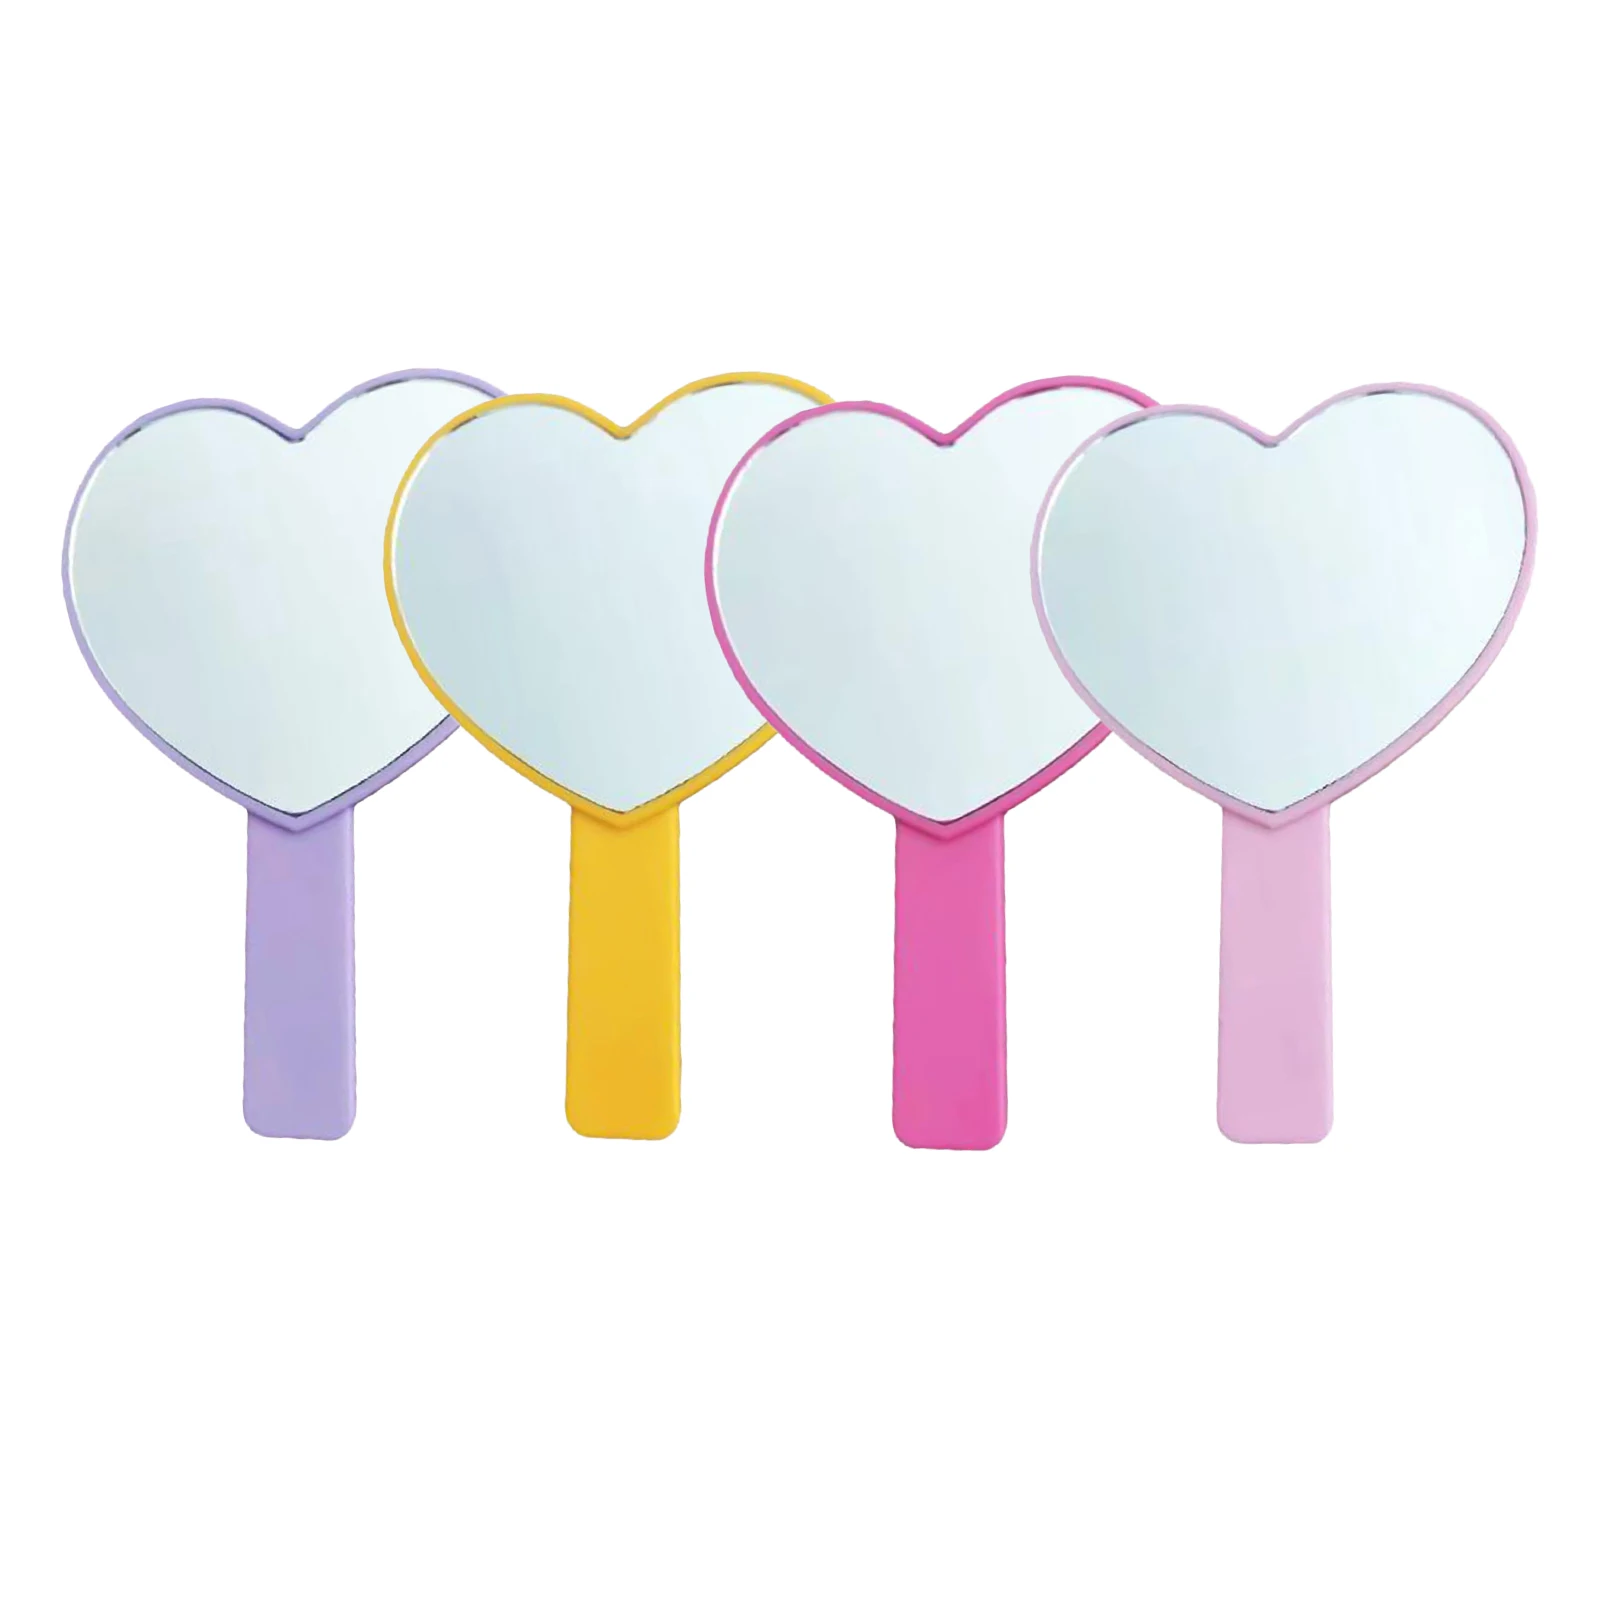 Portable Cute Heart Shaped Mirror Cosmetic Single Side Look Adorable Design